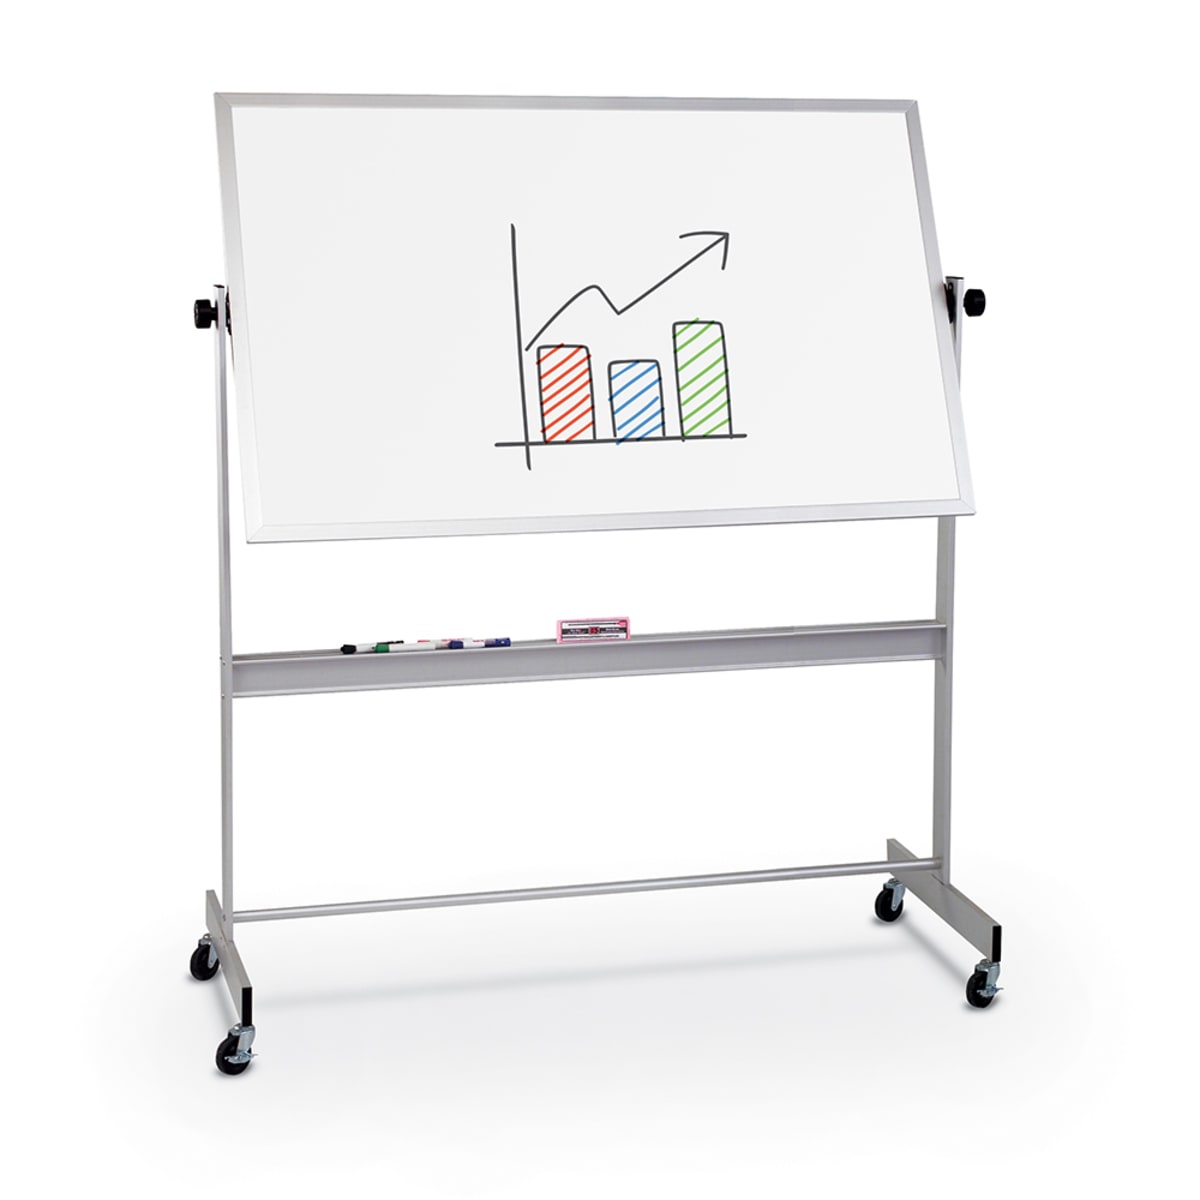 Mooreco Deluxe Mobile Reversible Board Dura-Rite Both sides - Aluminum Trim - 6'W x 4'H (Mooreco 668AG-HH) - SchoolOutlet